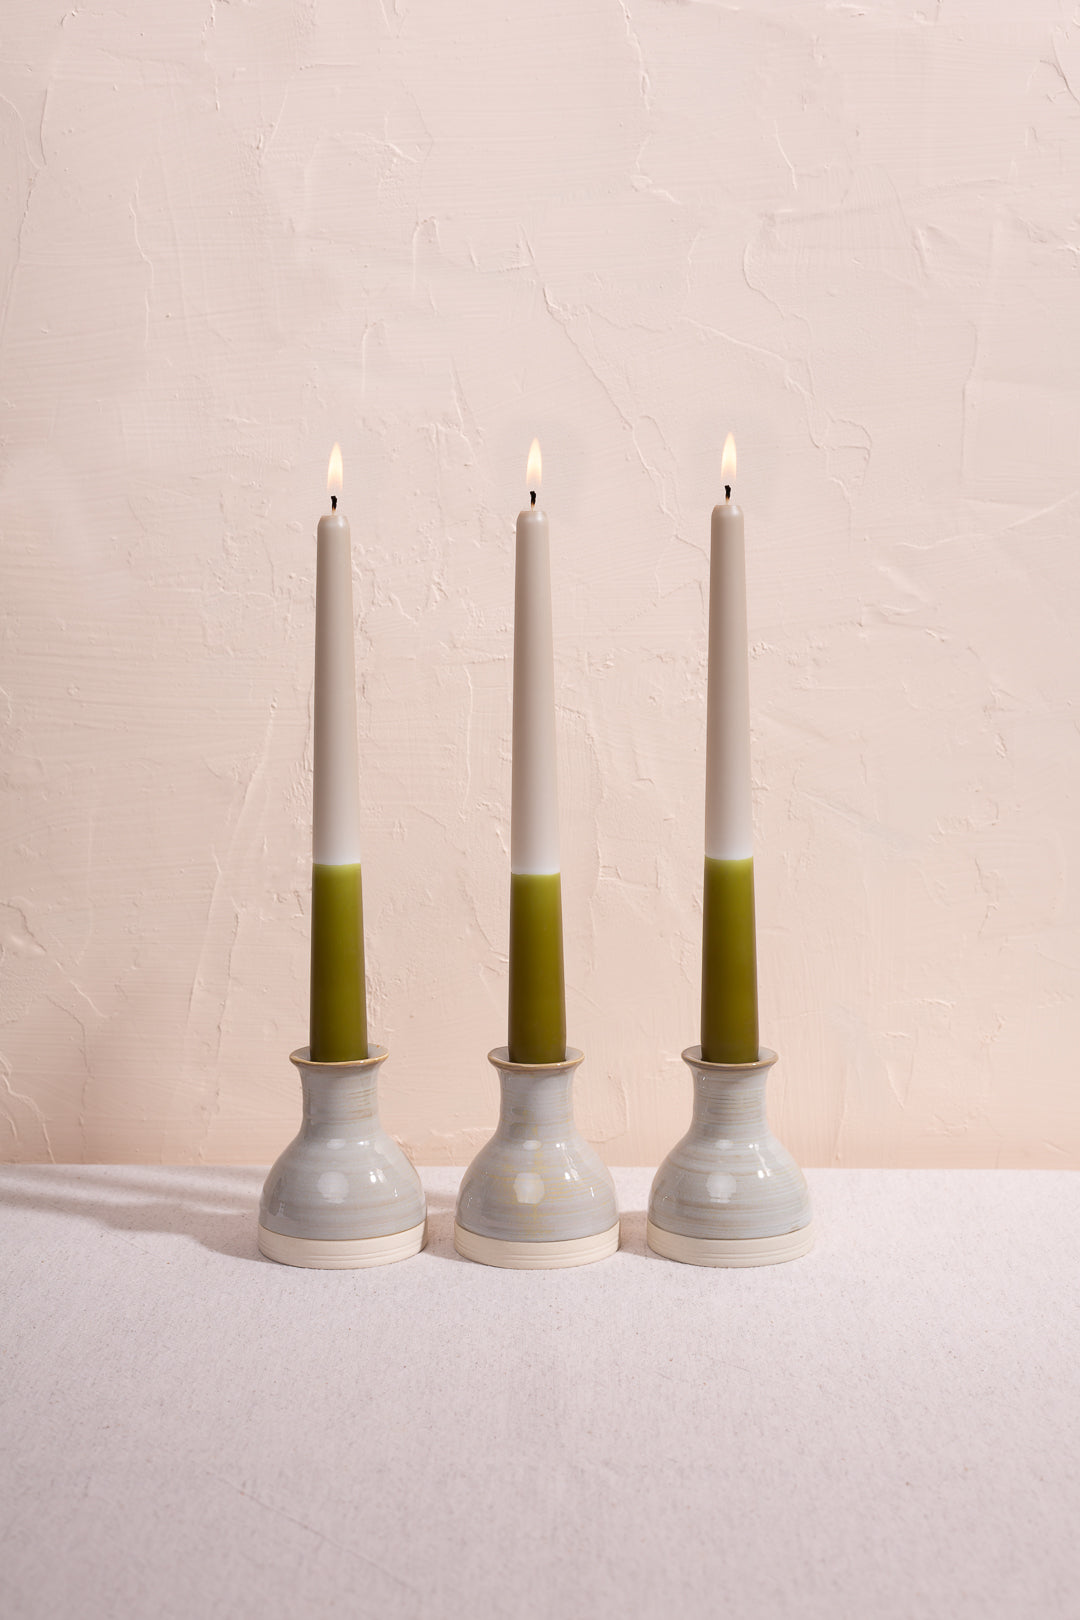 Forest moss green tapered candles. Colourful dinner candles made in England. Dip dyed by hand.